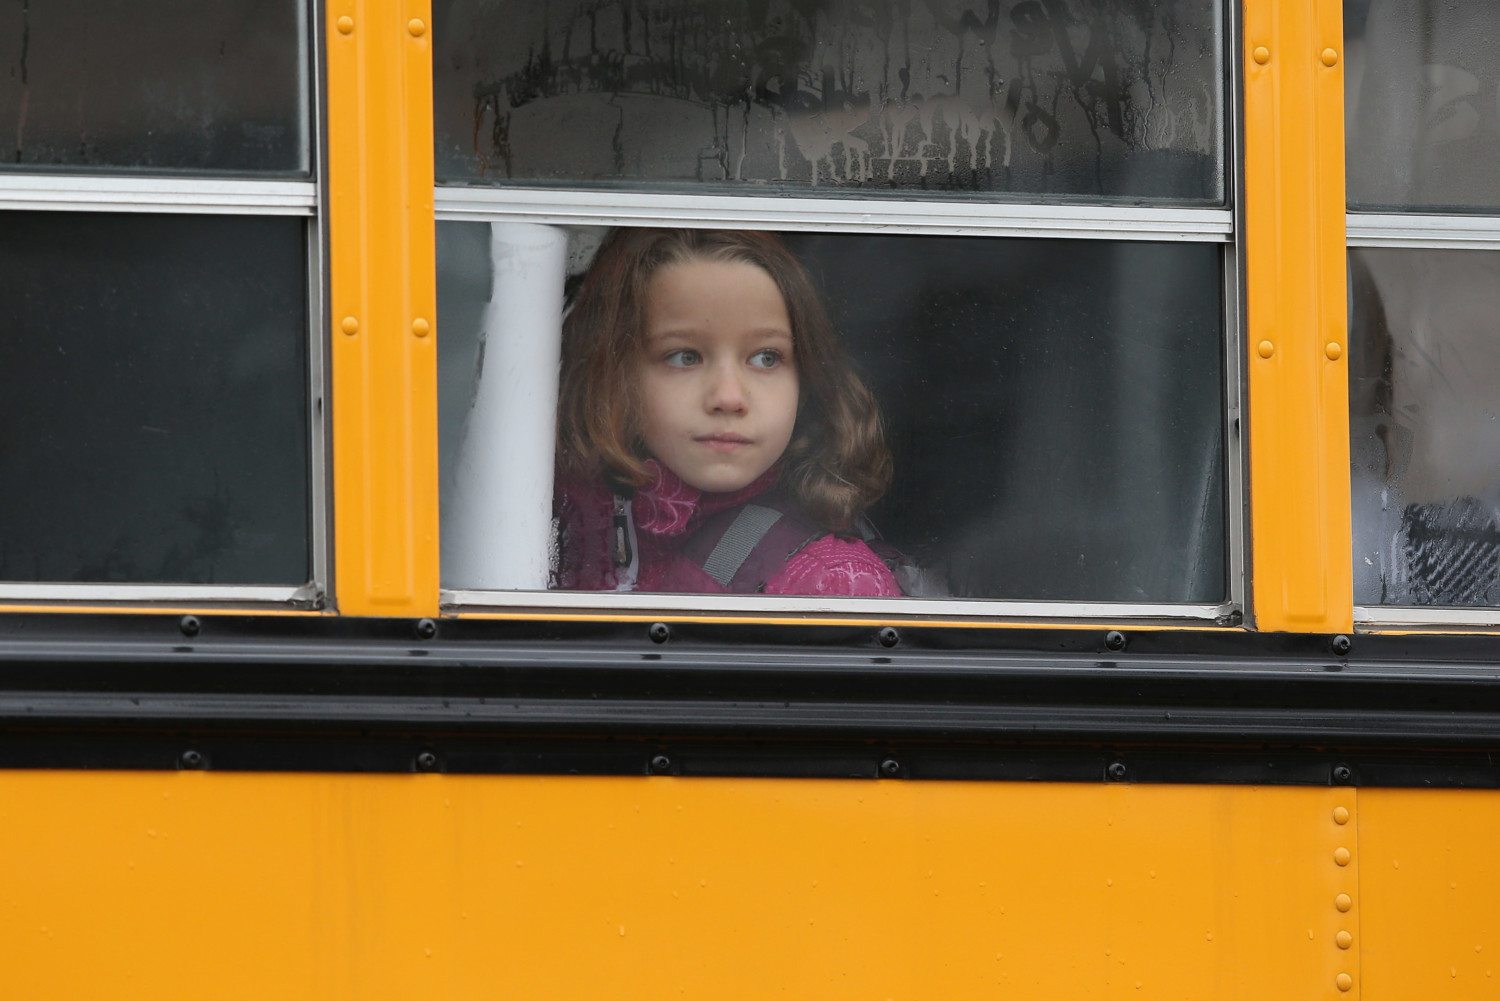 Funerals Continue To Be Held For Victims Of CT Elementary School Massacre